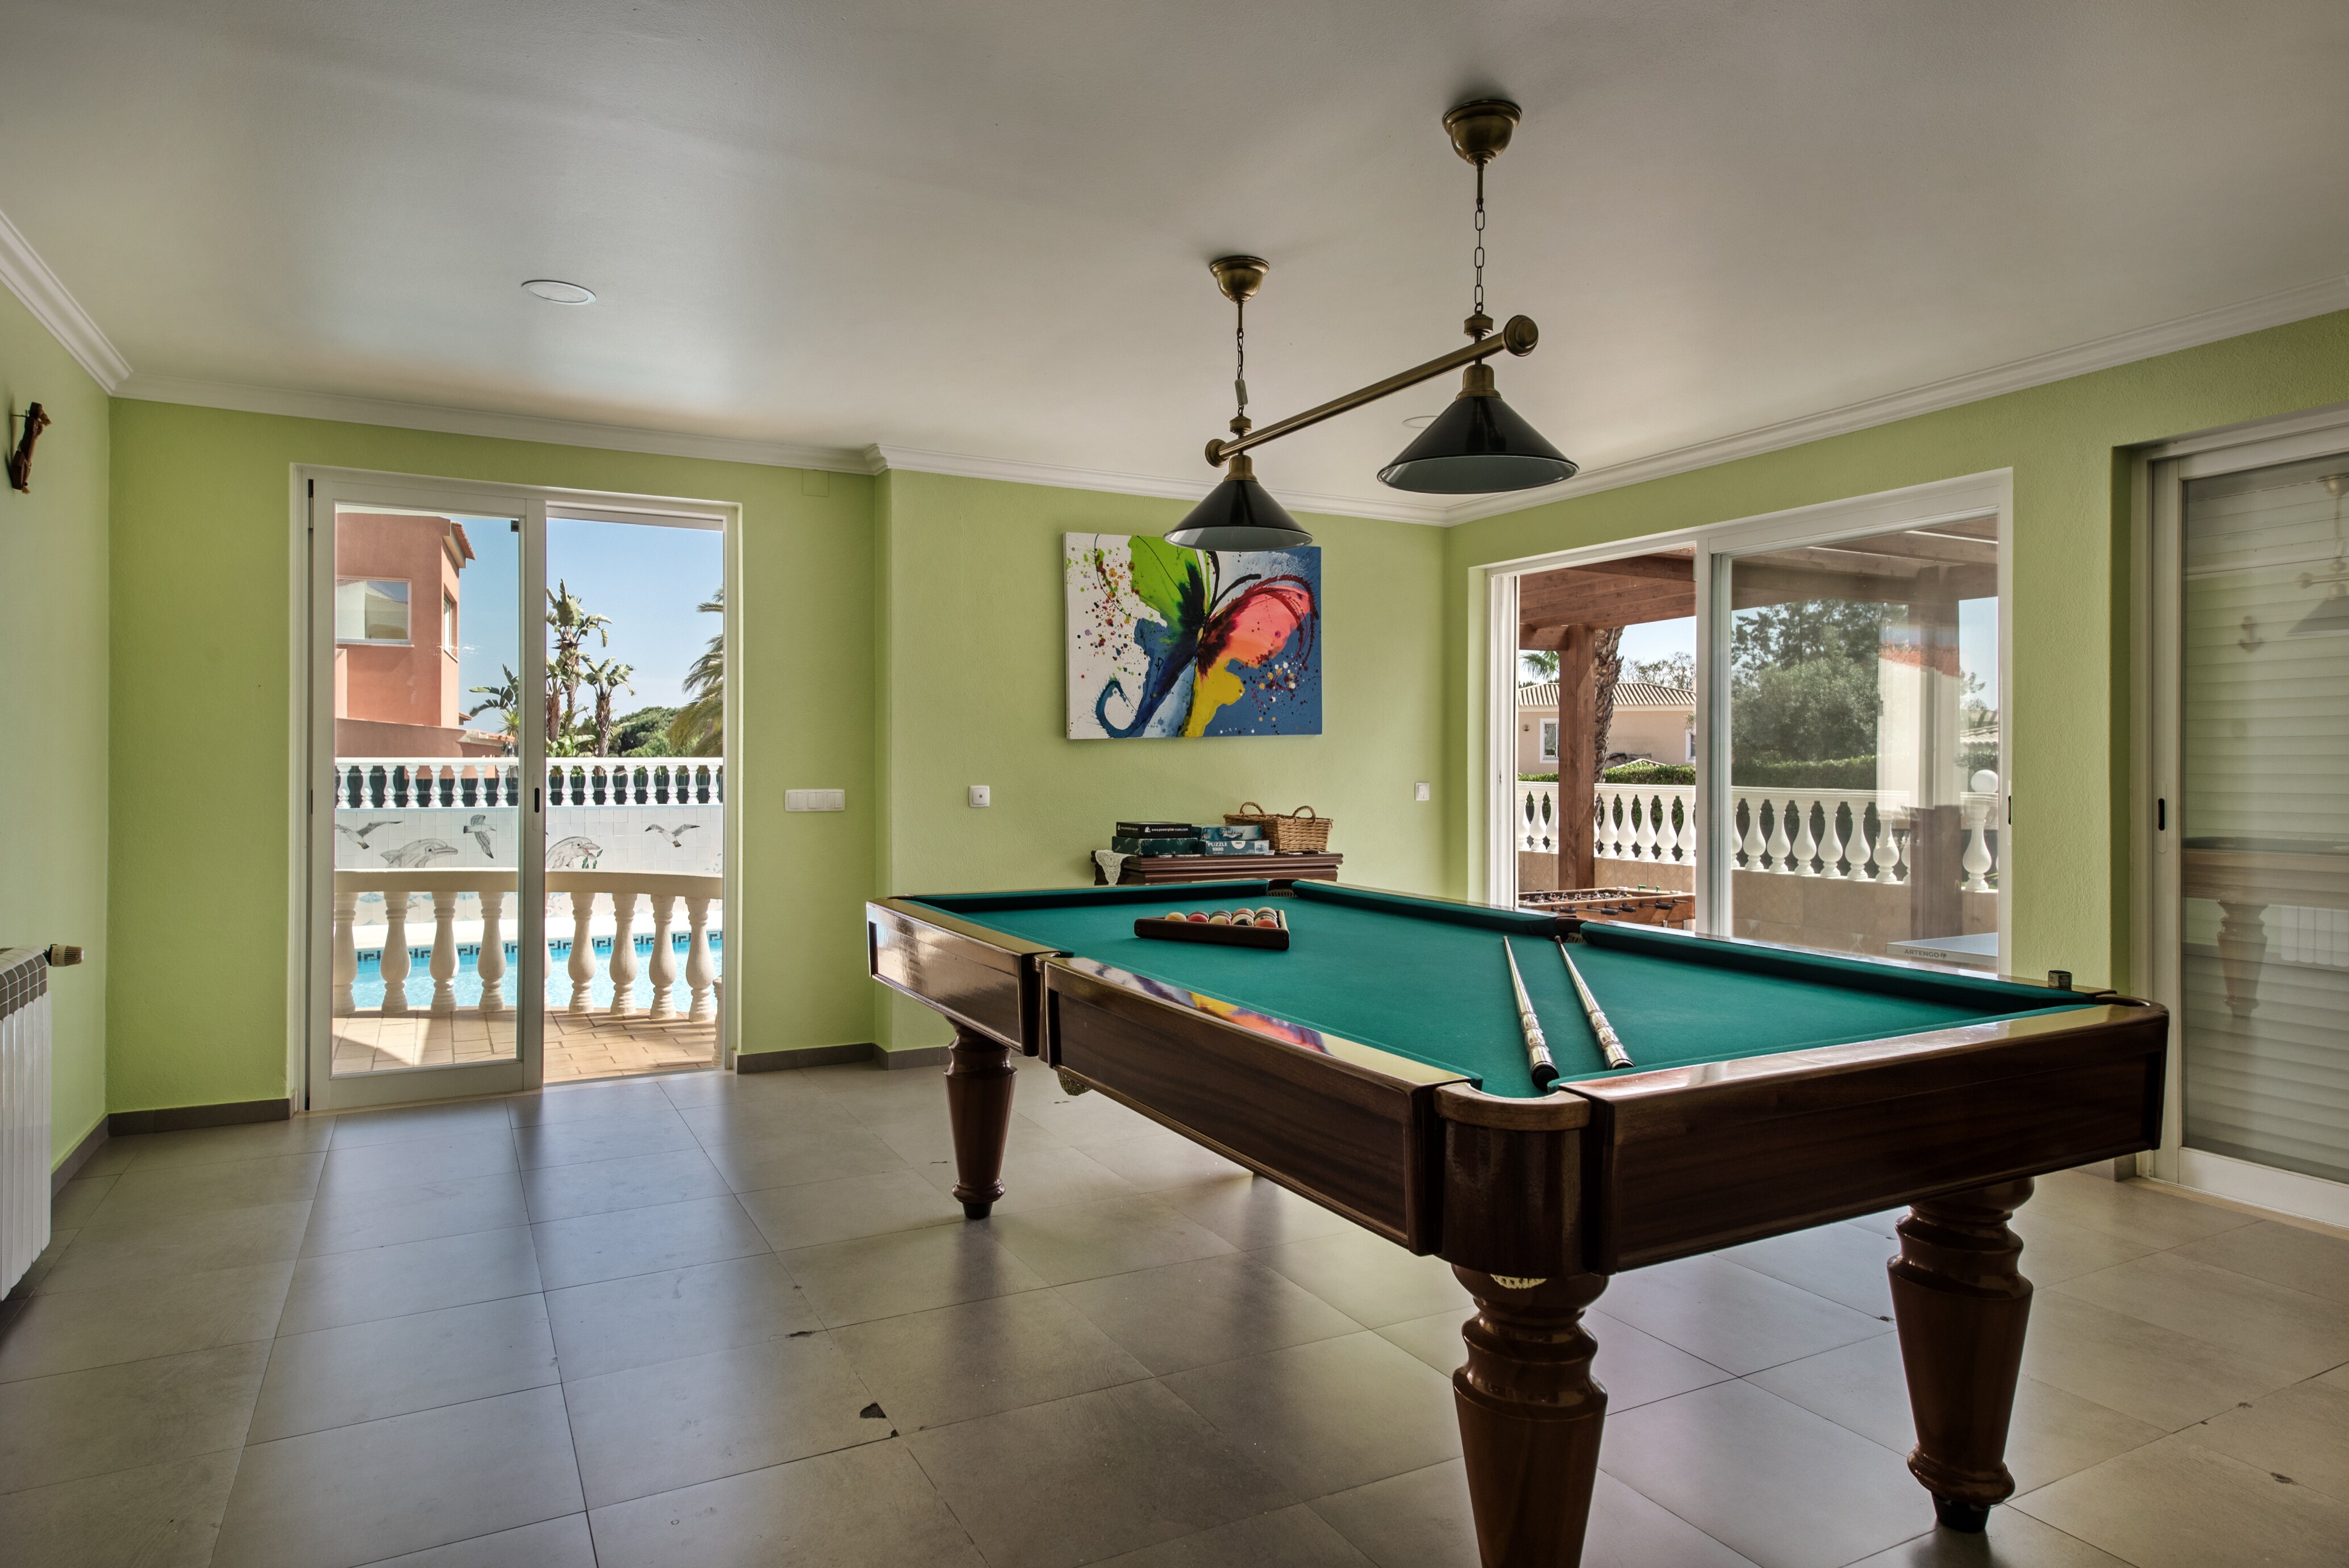 Property Image 2 - Villa Miguel with private pool and games rooms